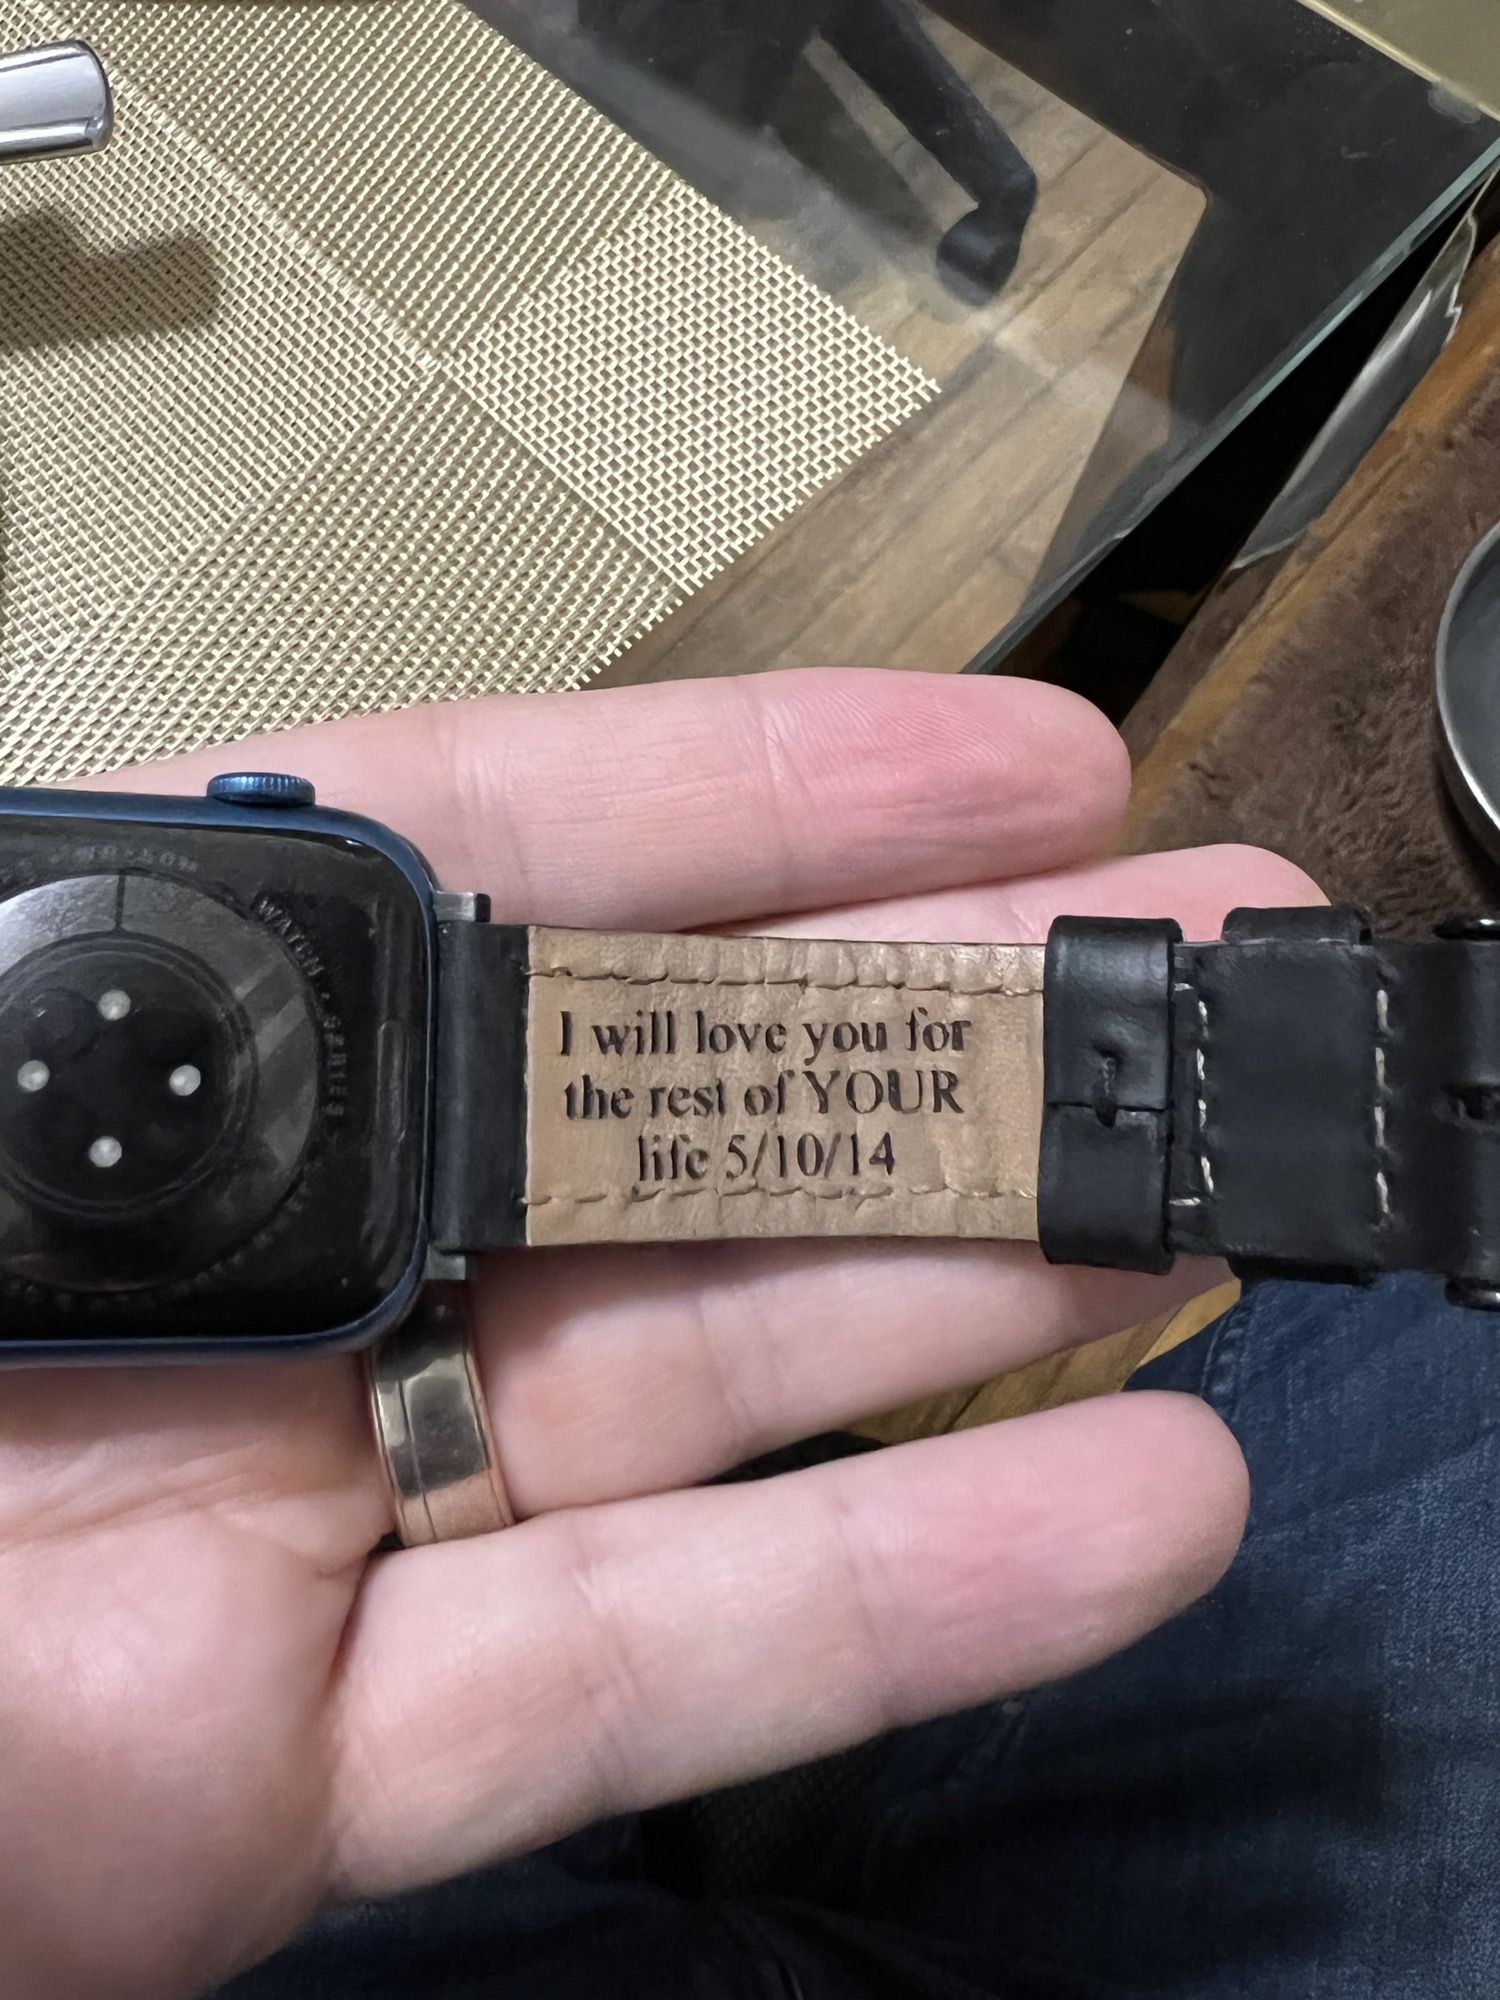 My wife got me an engraved watch band. A little ominous…